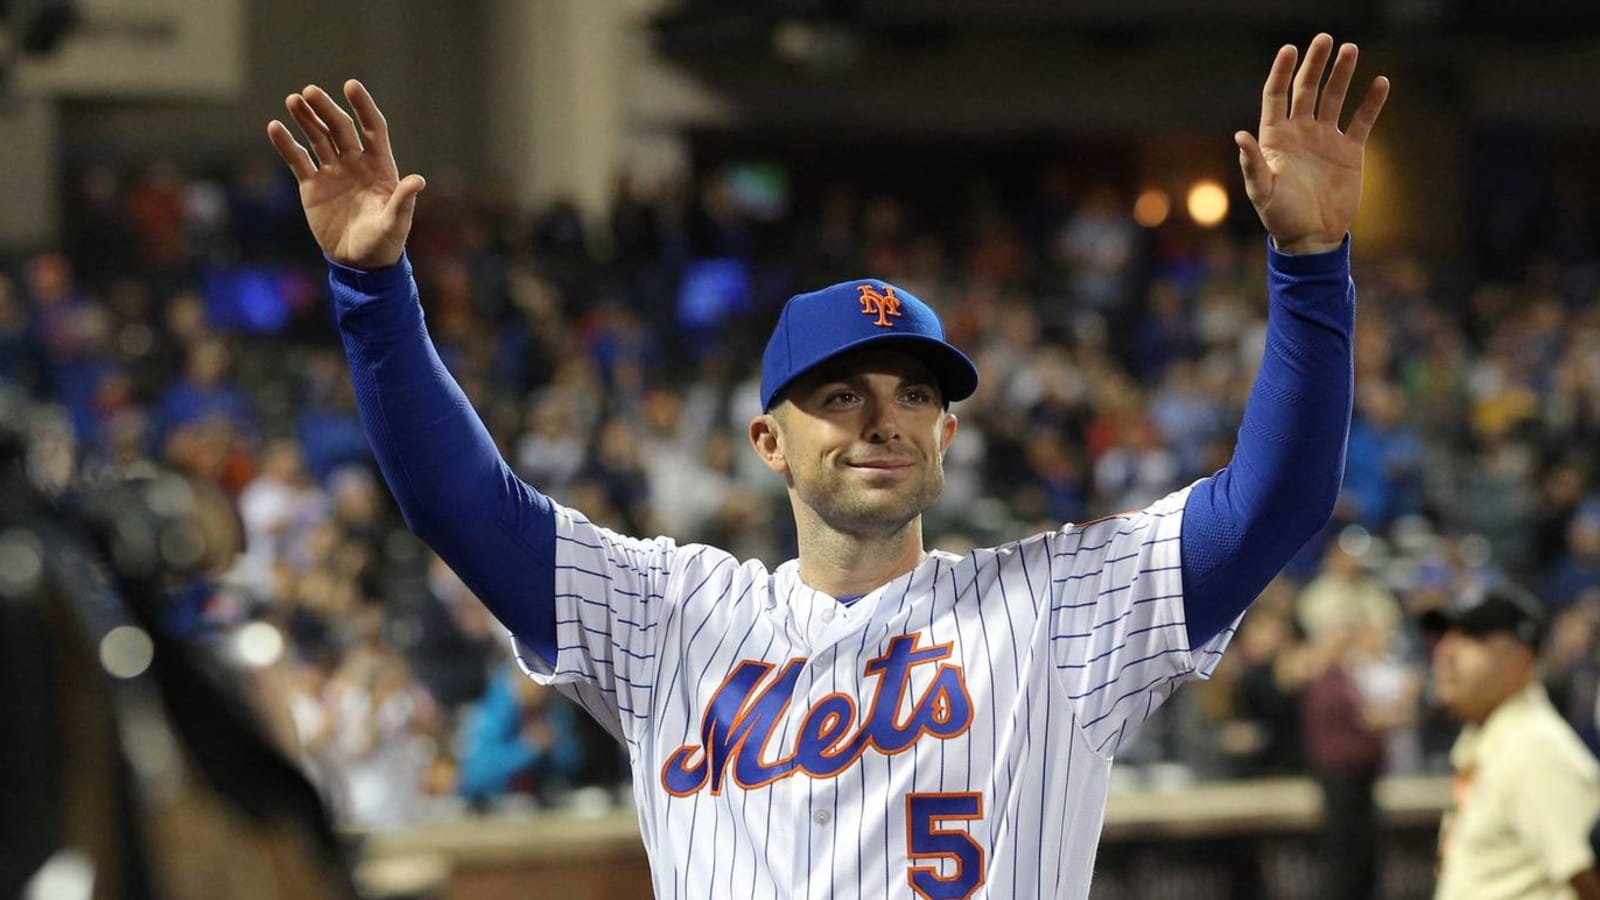 A David Wright wallpaper from - I like the New York Mets